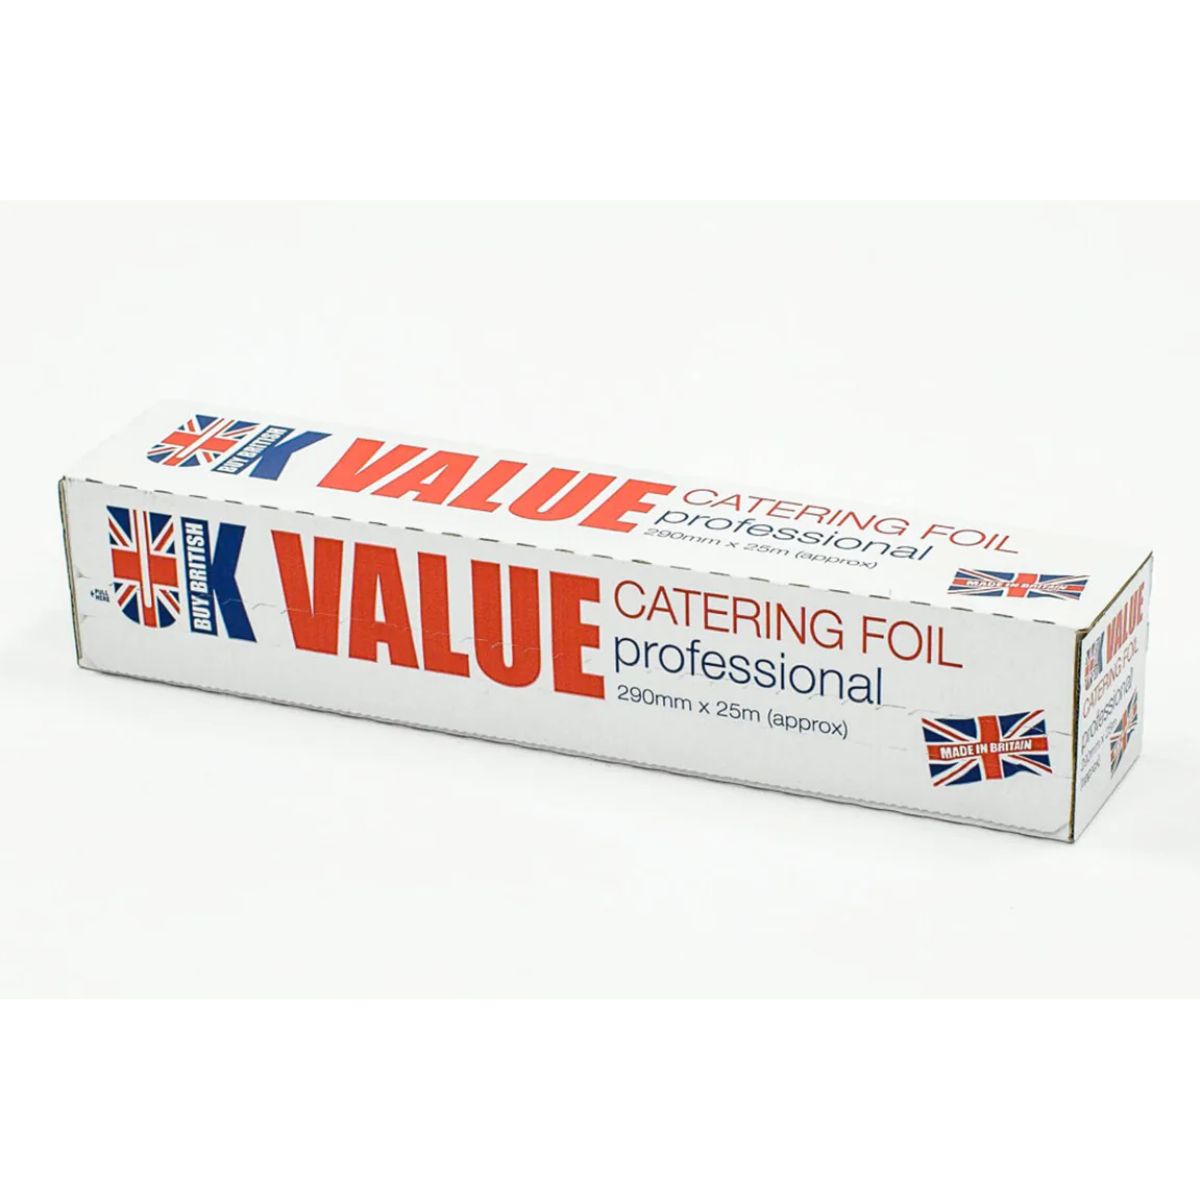 A box of UK Value brand professional catering foil.